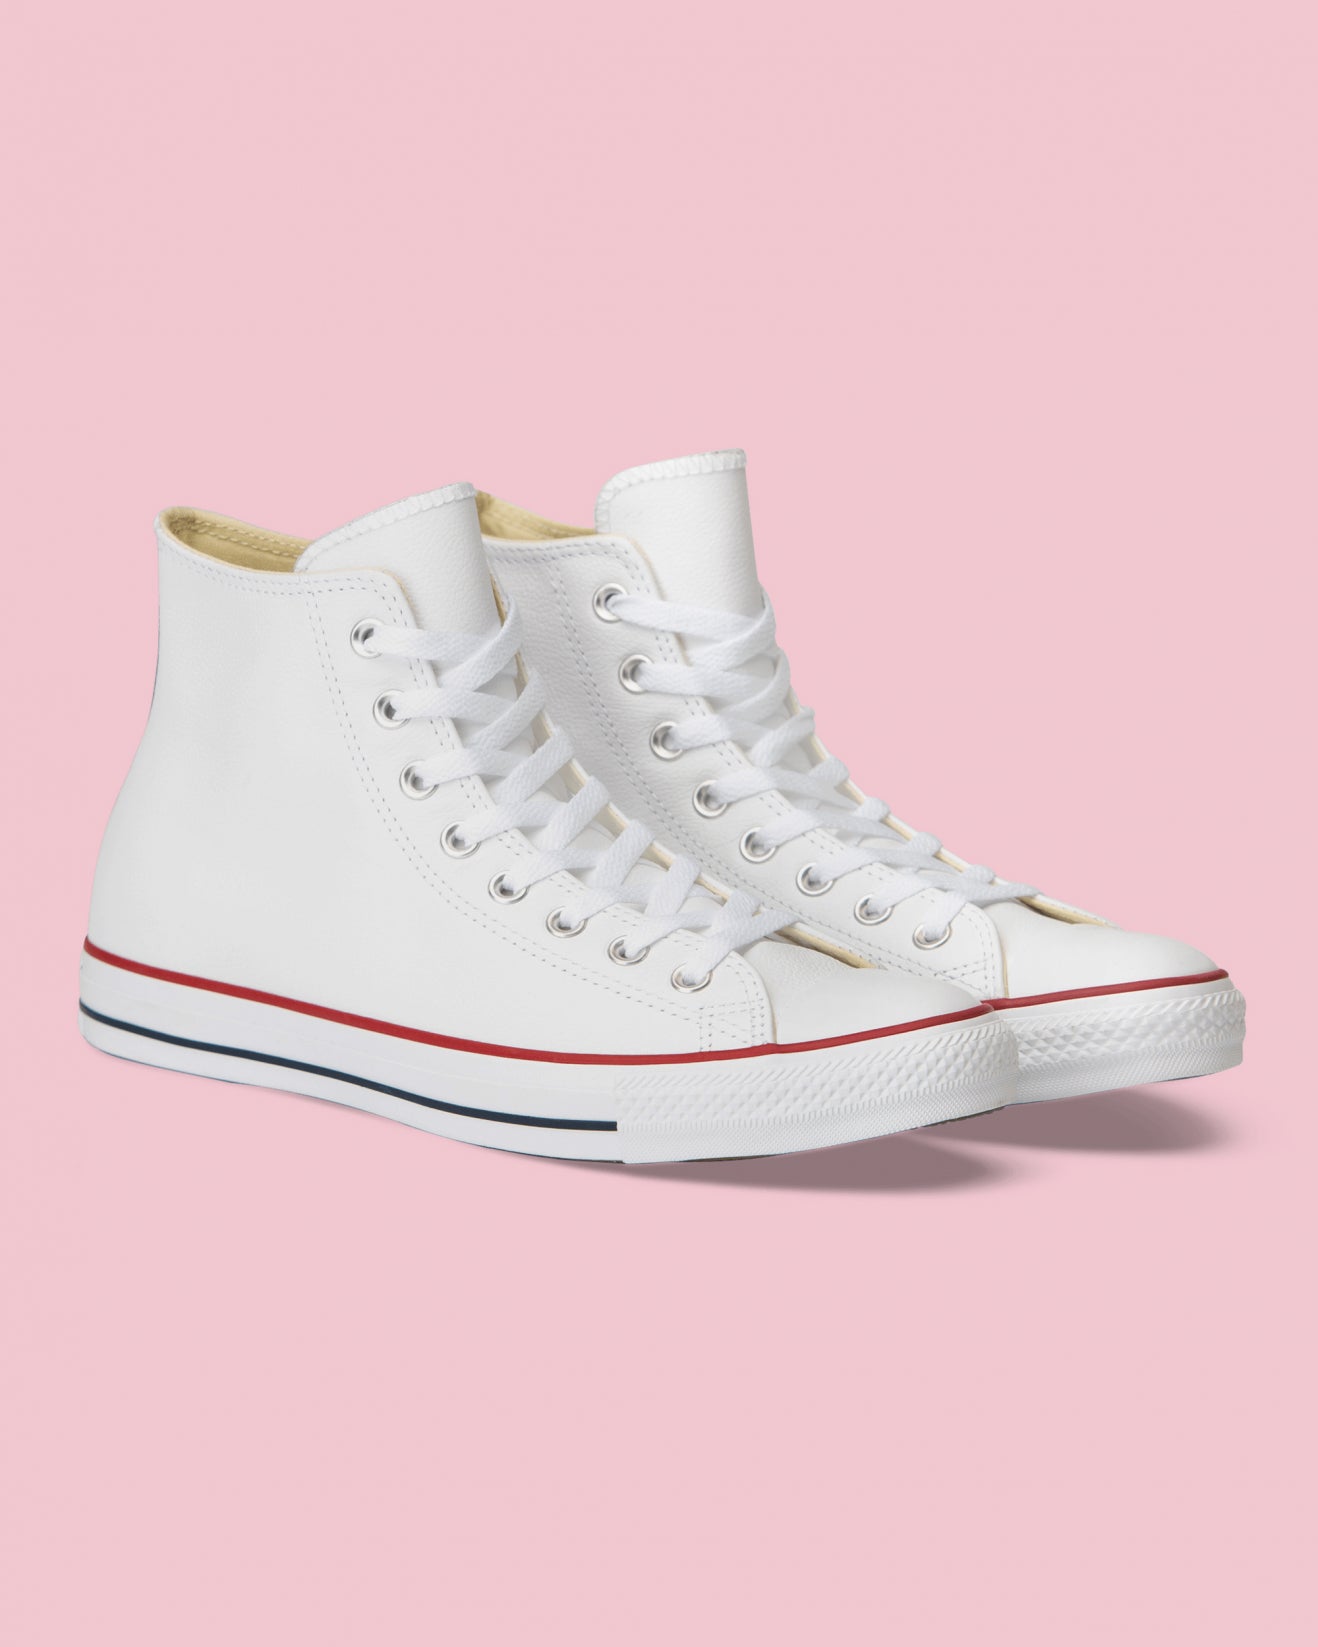 CONVERSE CHUCK TAYLOR LEATHER HIGH TOP WHITE